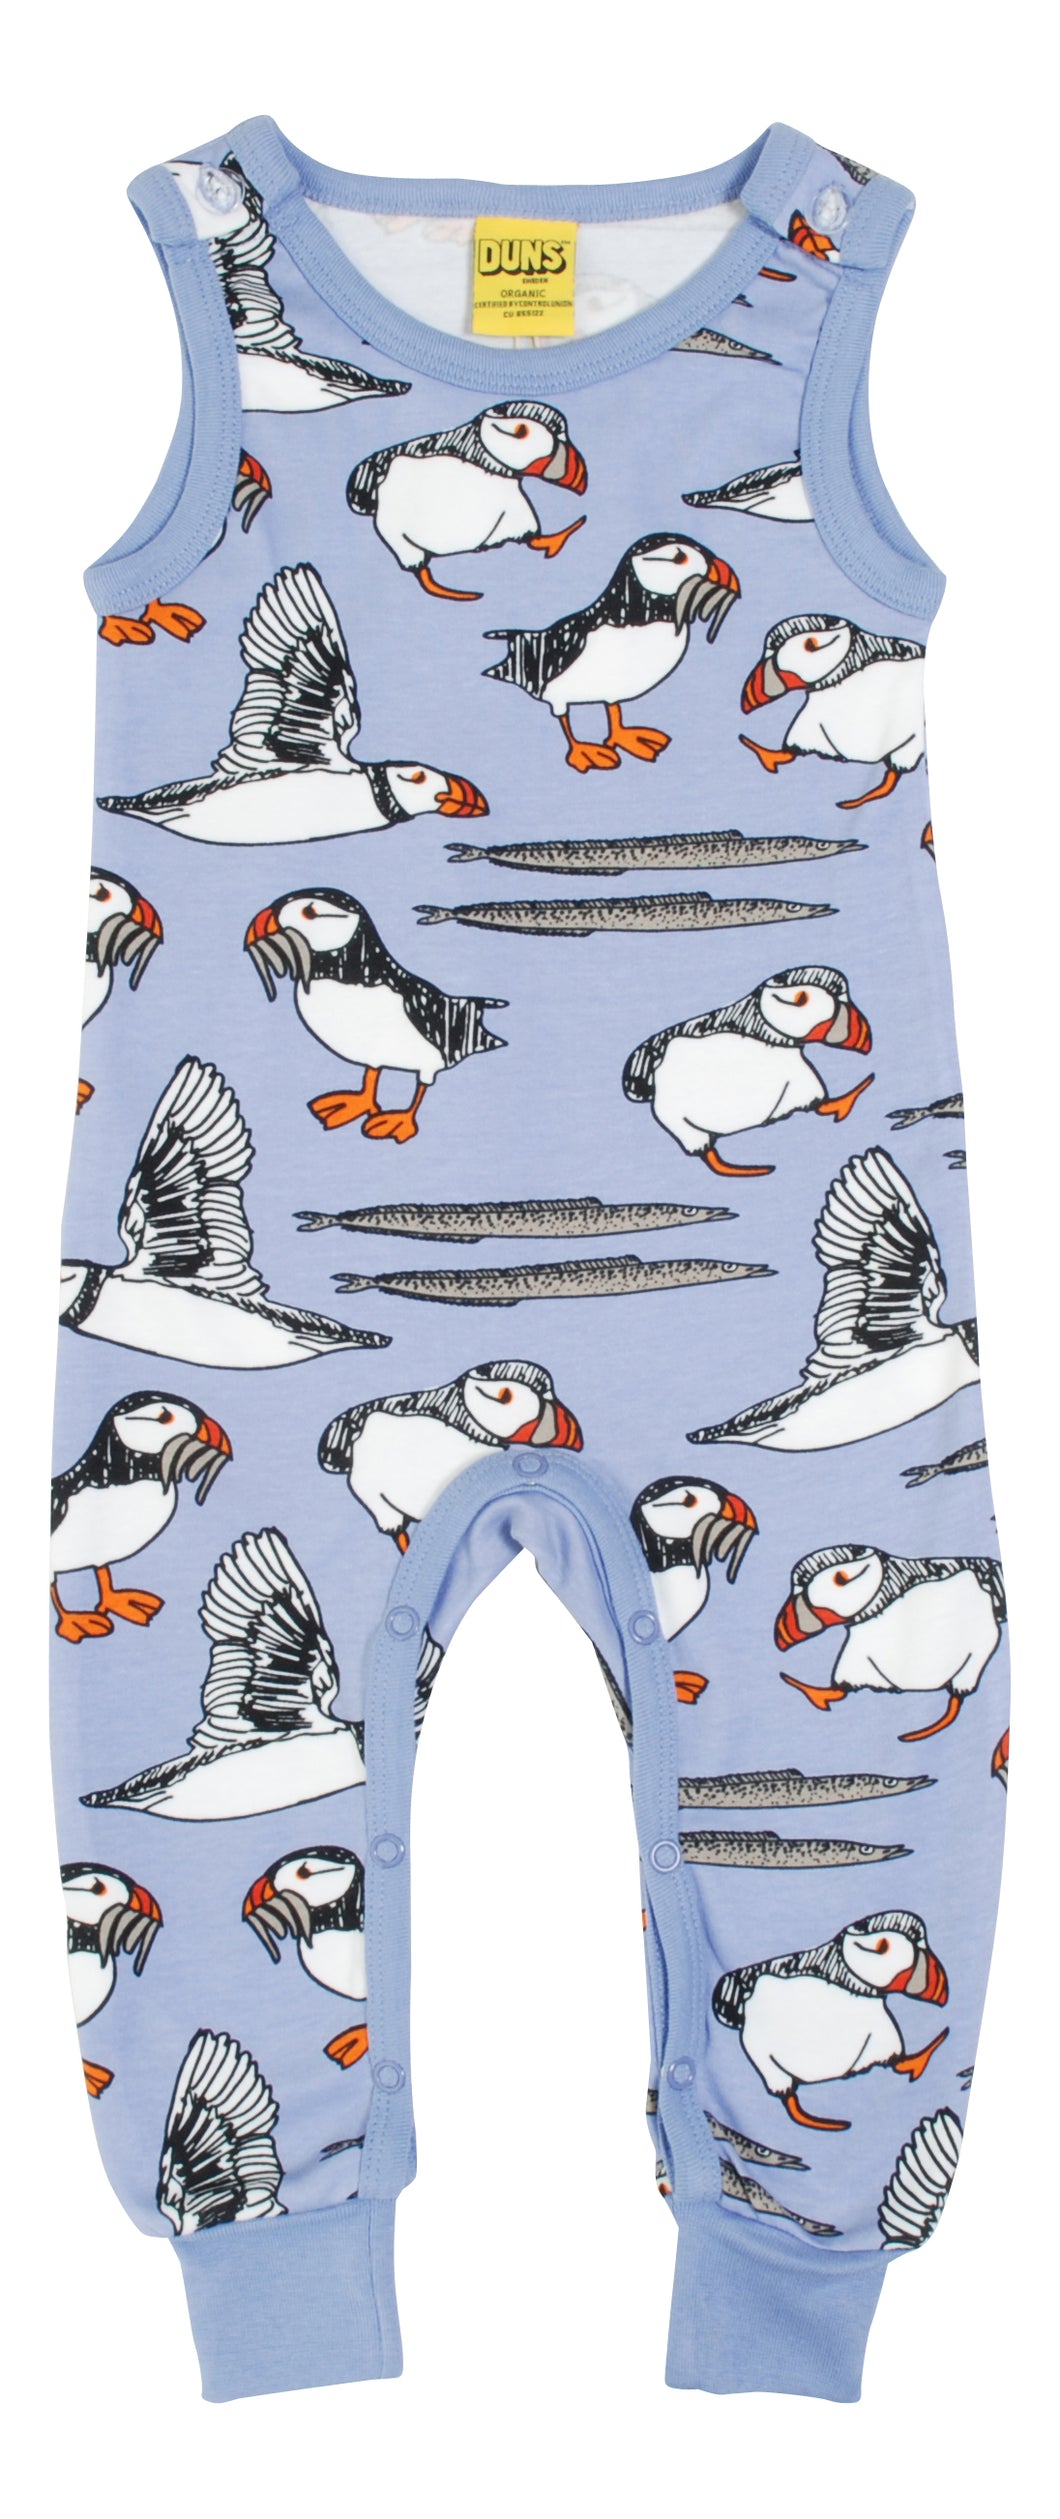 Duns Dungarees - Puffin - Easter Egg